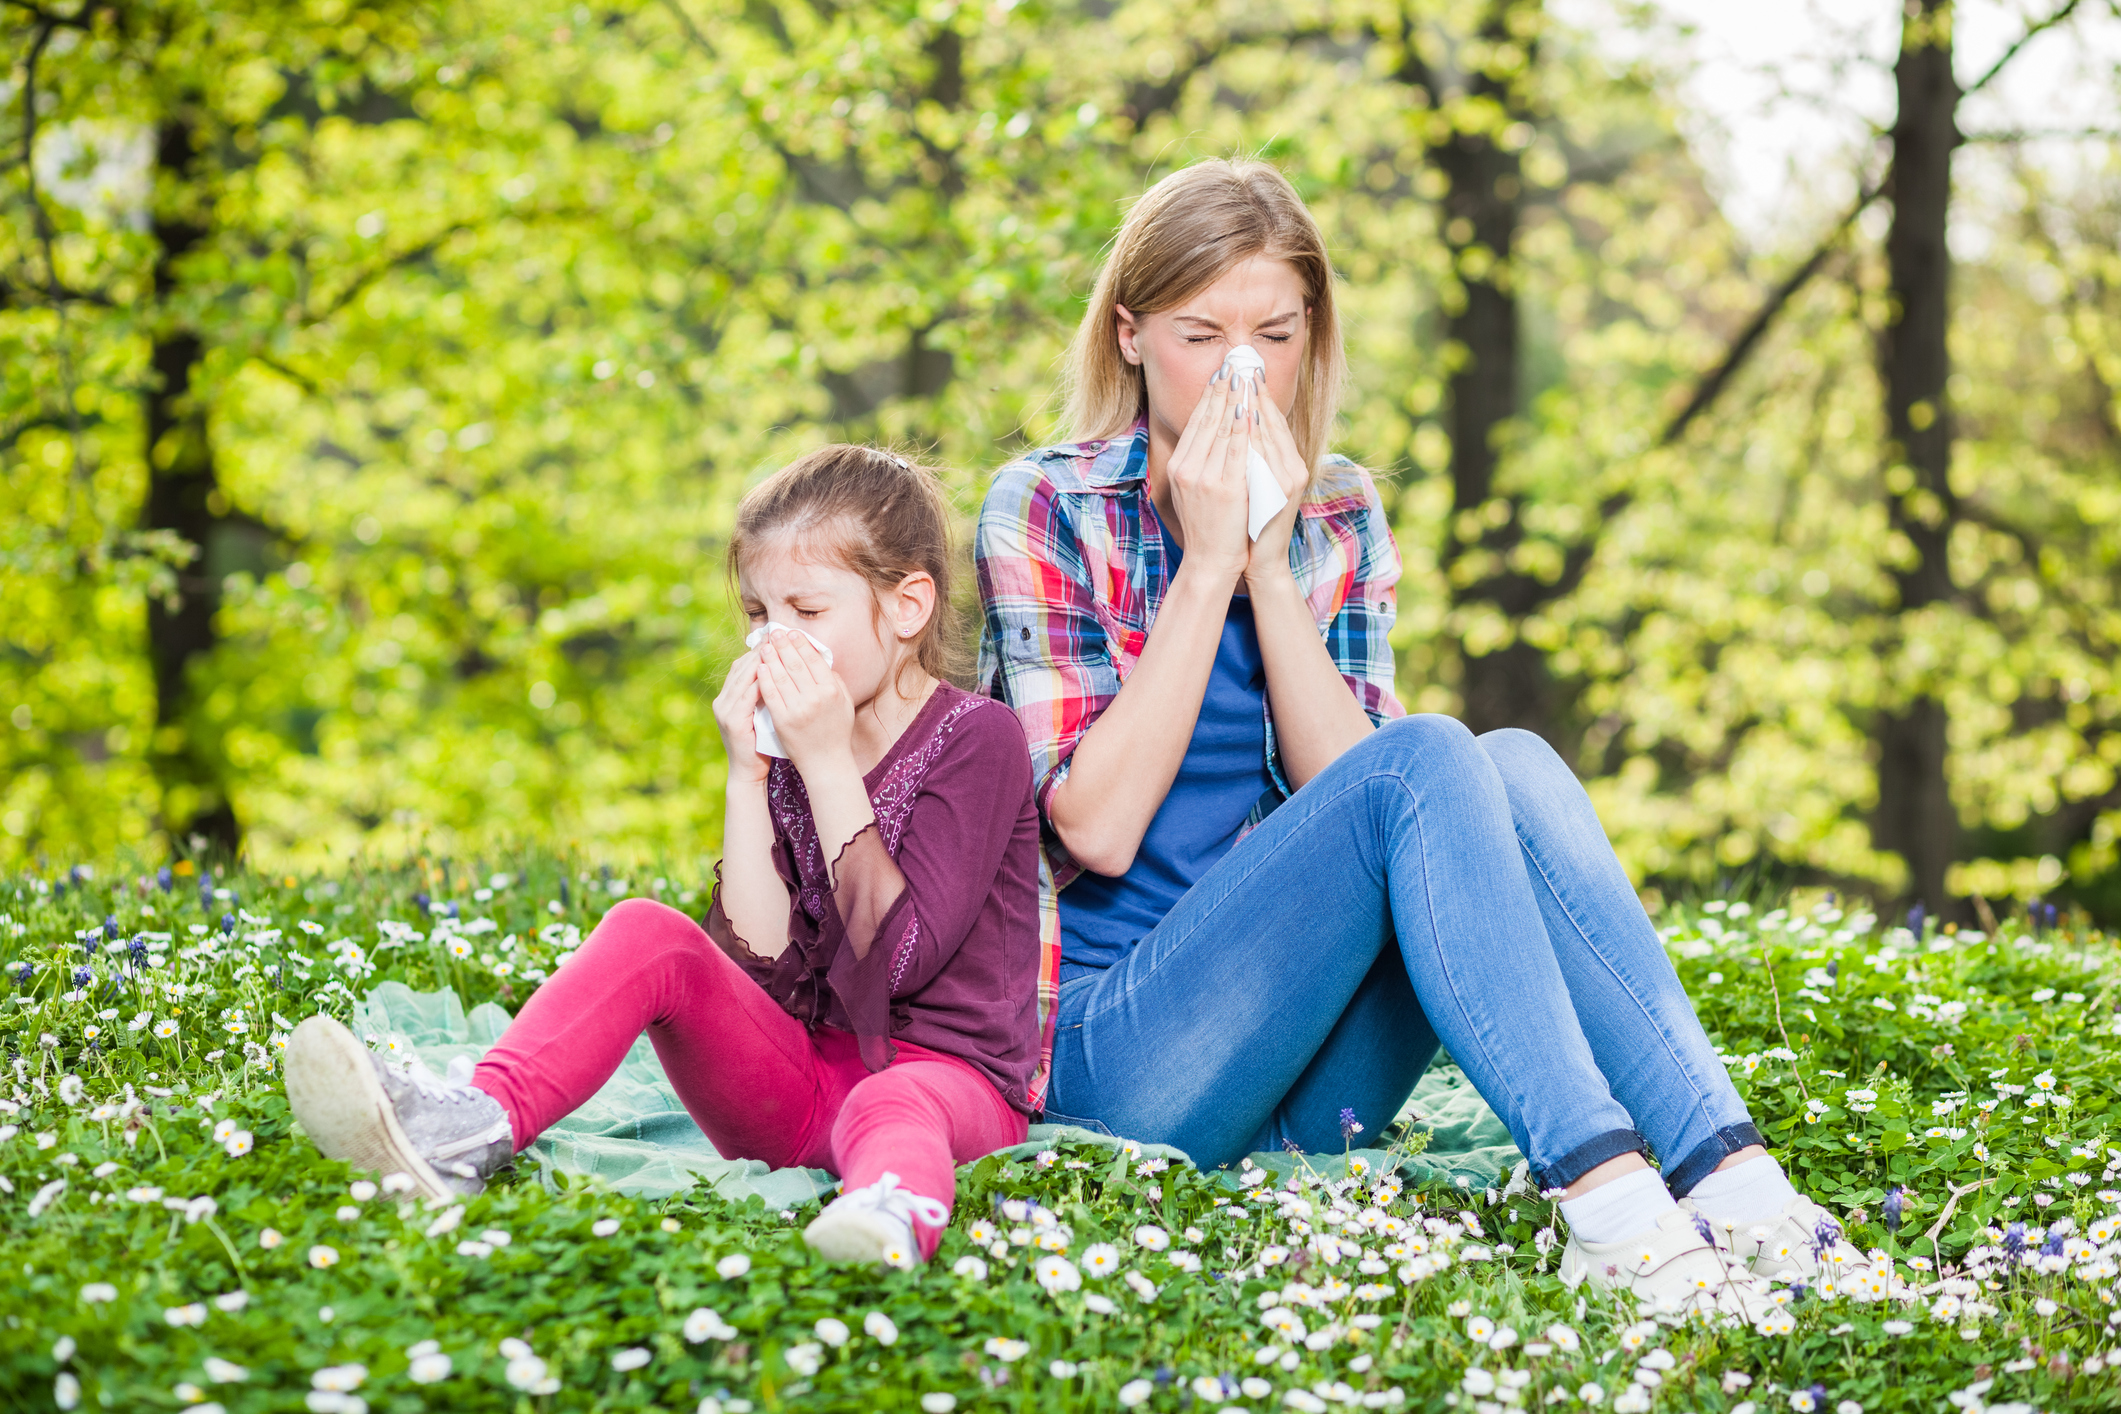 Woman and girl outside sneezing from allergies